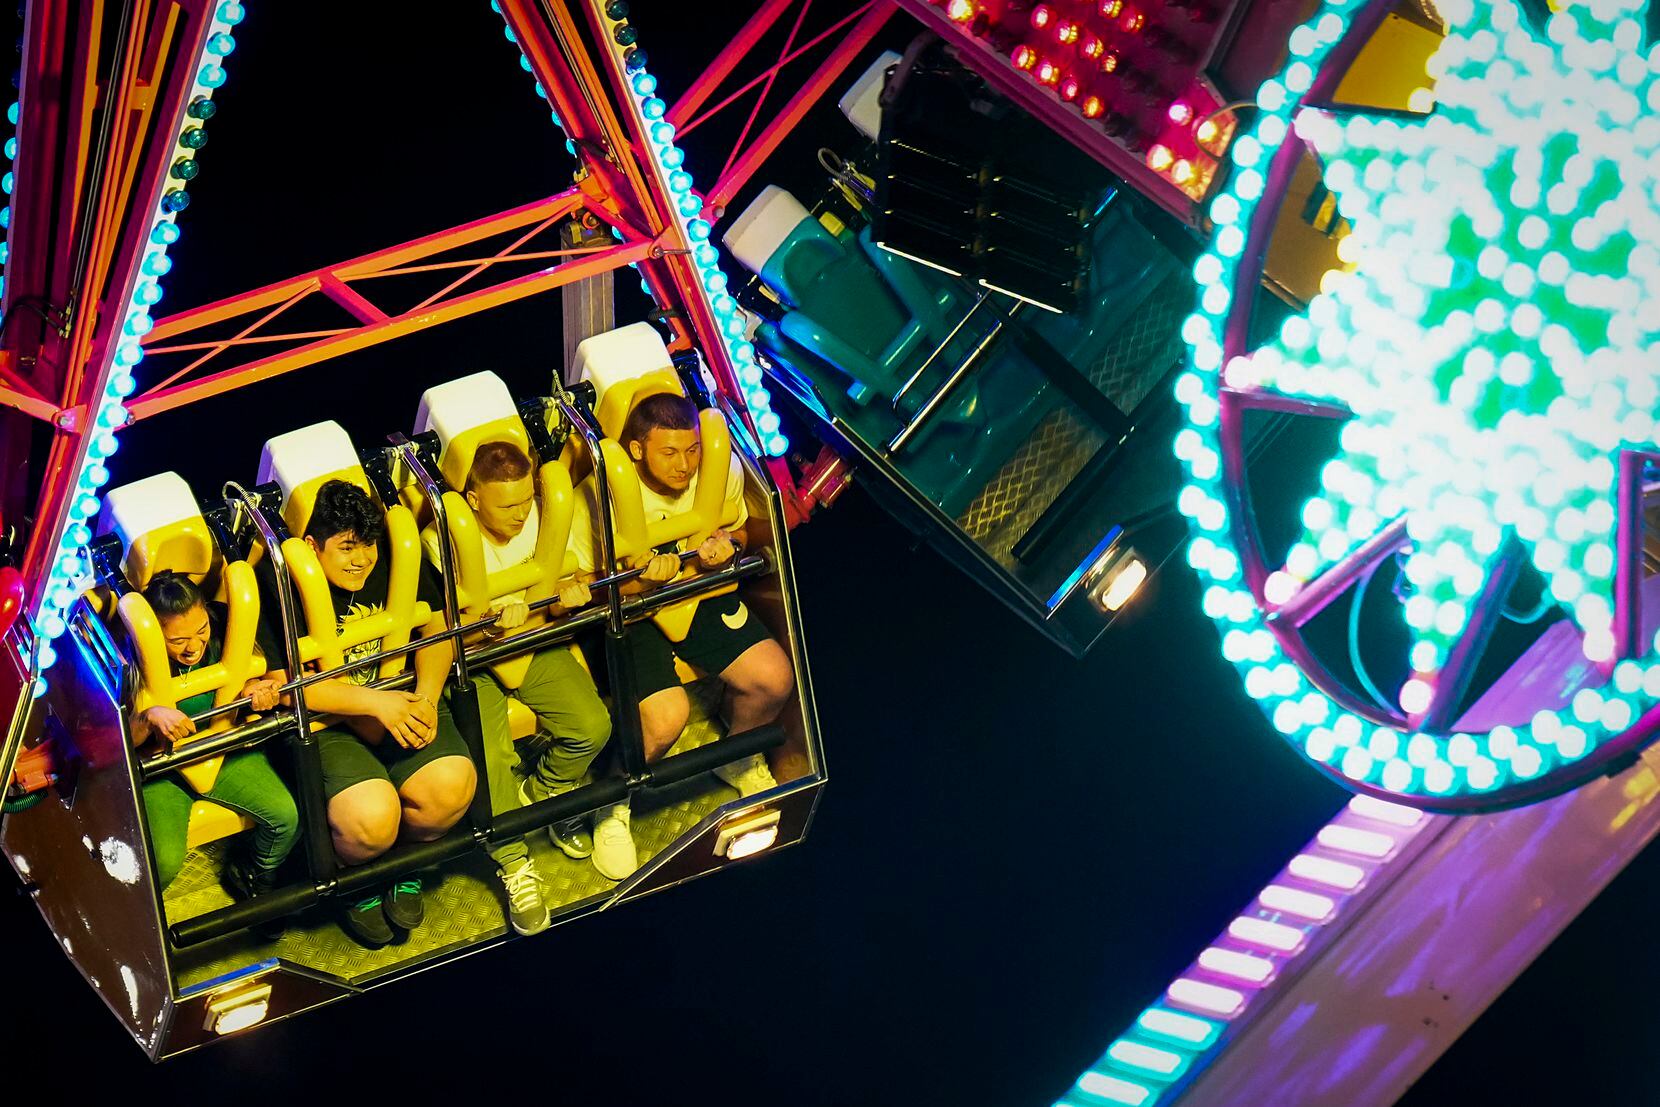 Fairgoers spin on a midway ride on opening night at the State Fair of Texas on Friday, Sept....